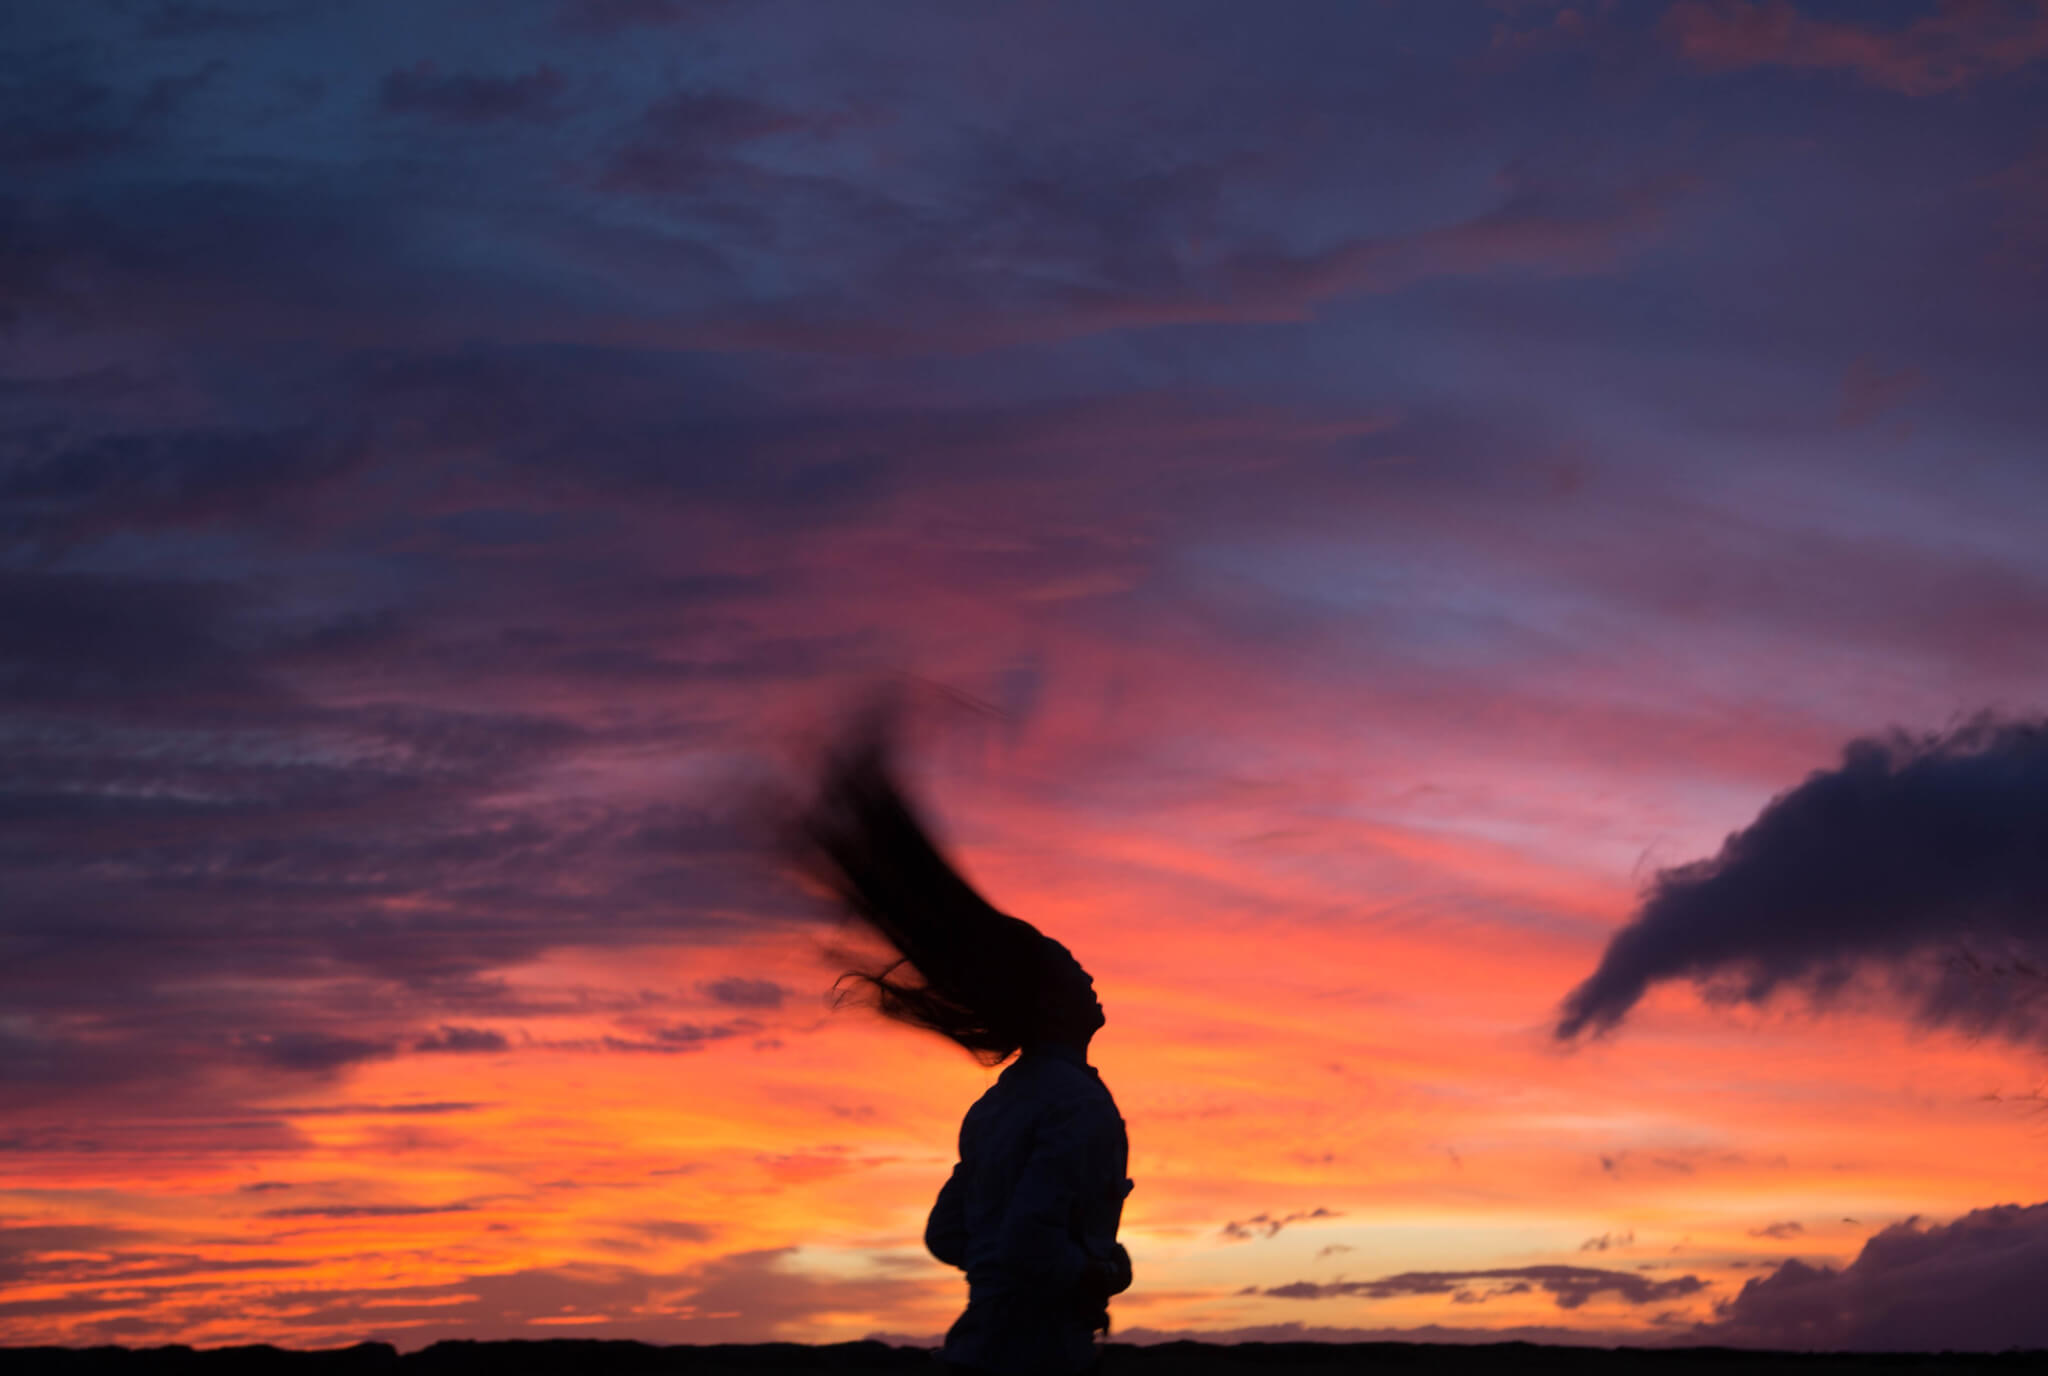 Hair flip silhouette during Hawaii sunset. Hawaii sunset photography tips to catch stunning snaps